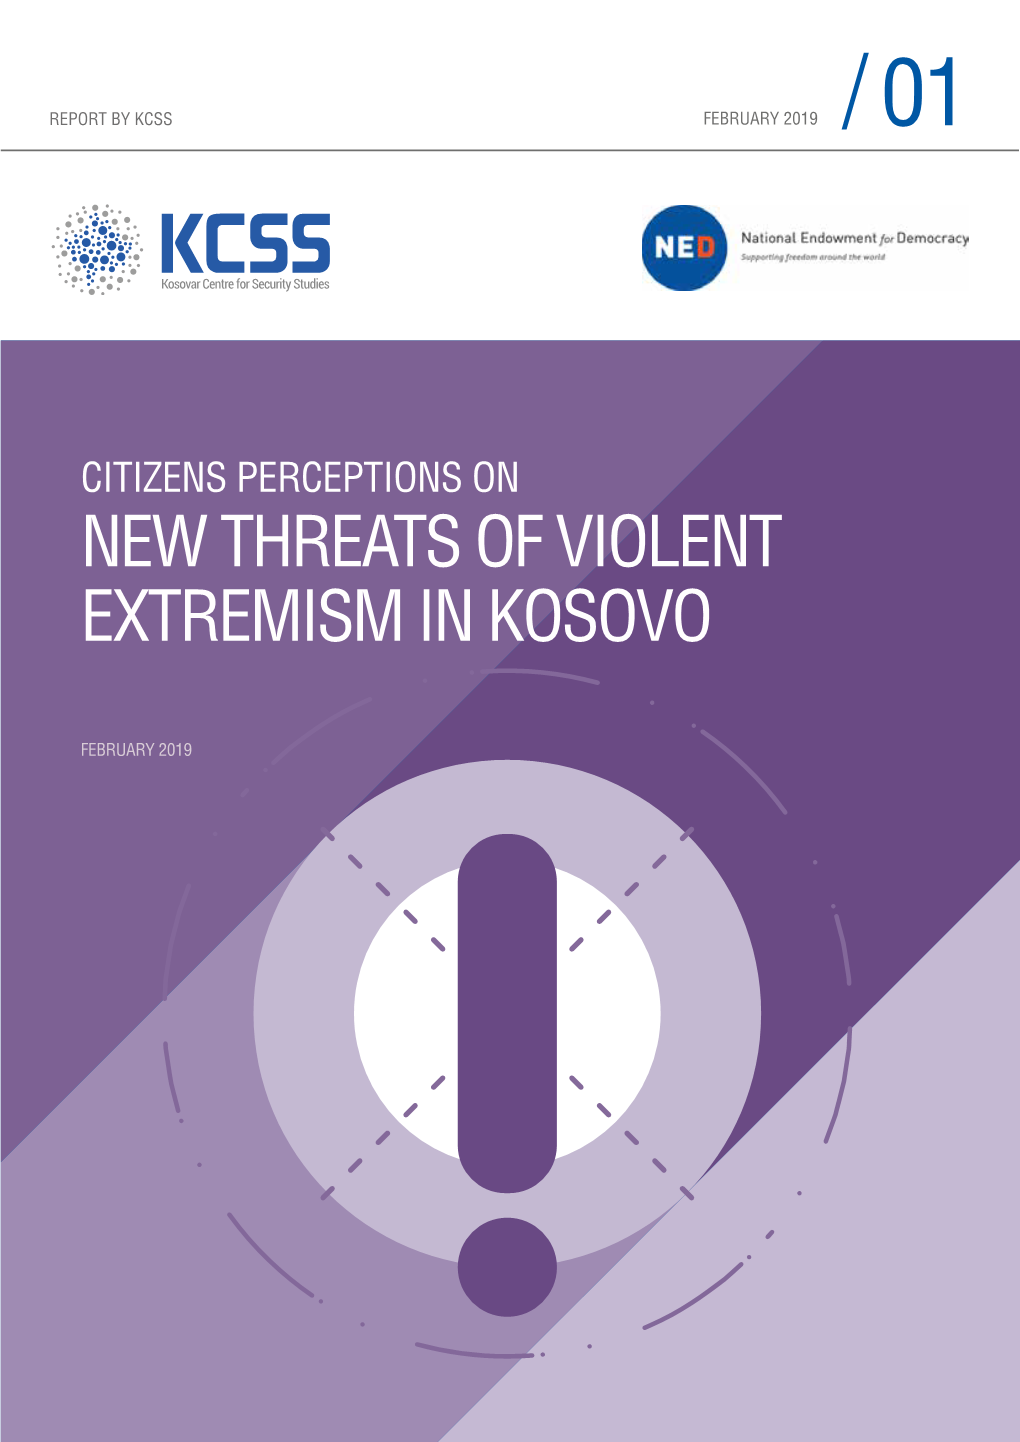 Citizens Perceptions on New Threats of Violent Extremism in Kosovo